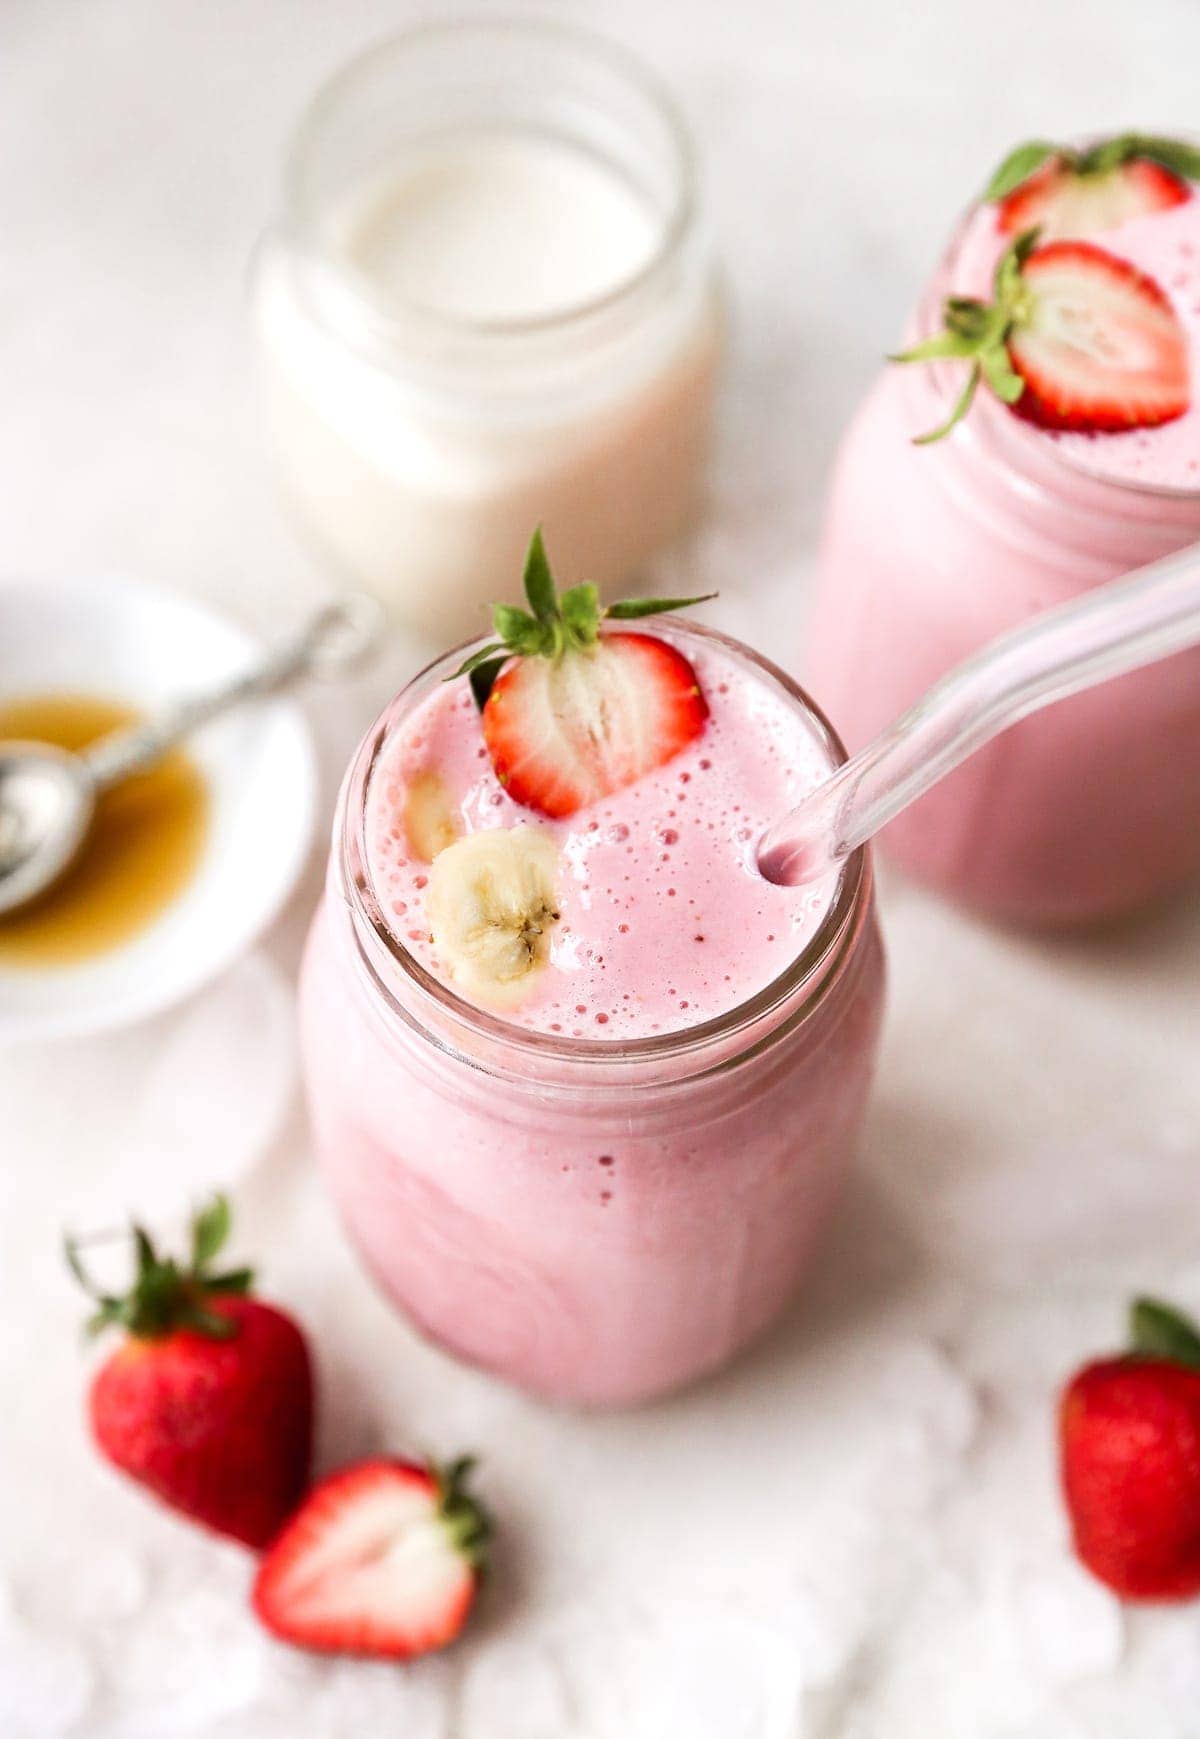 Strawberry Banana Smoothie A Simple And Delicious Recipe For This My Xxx Hot Girl 